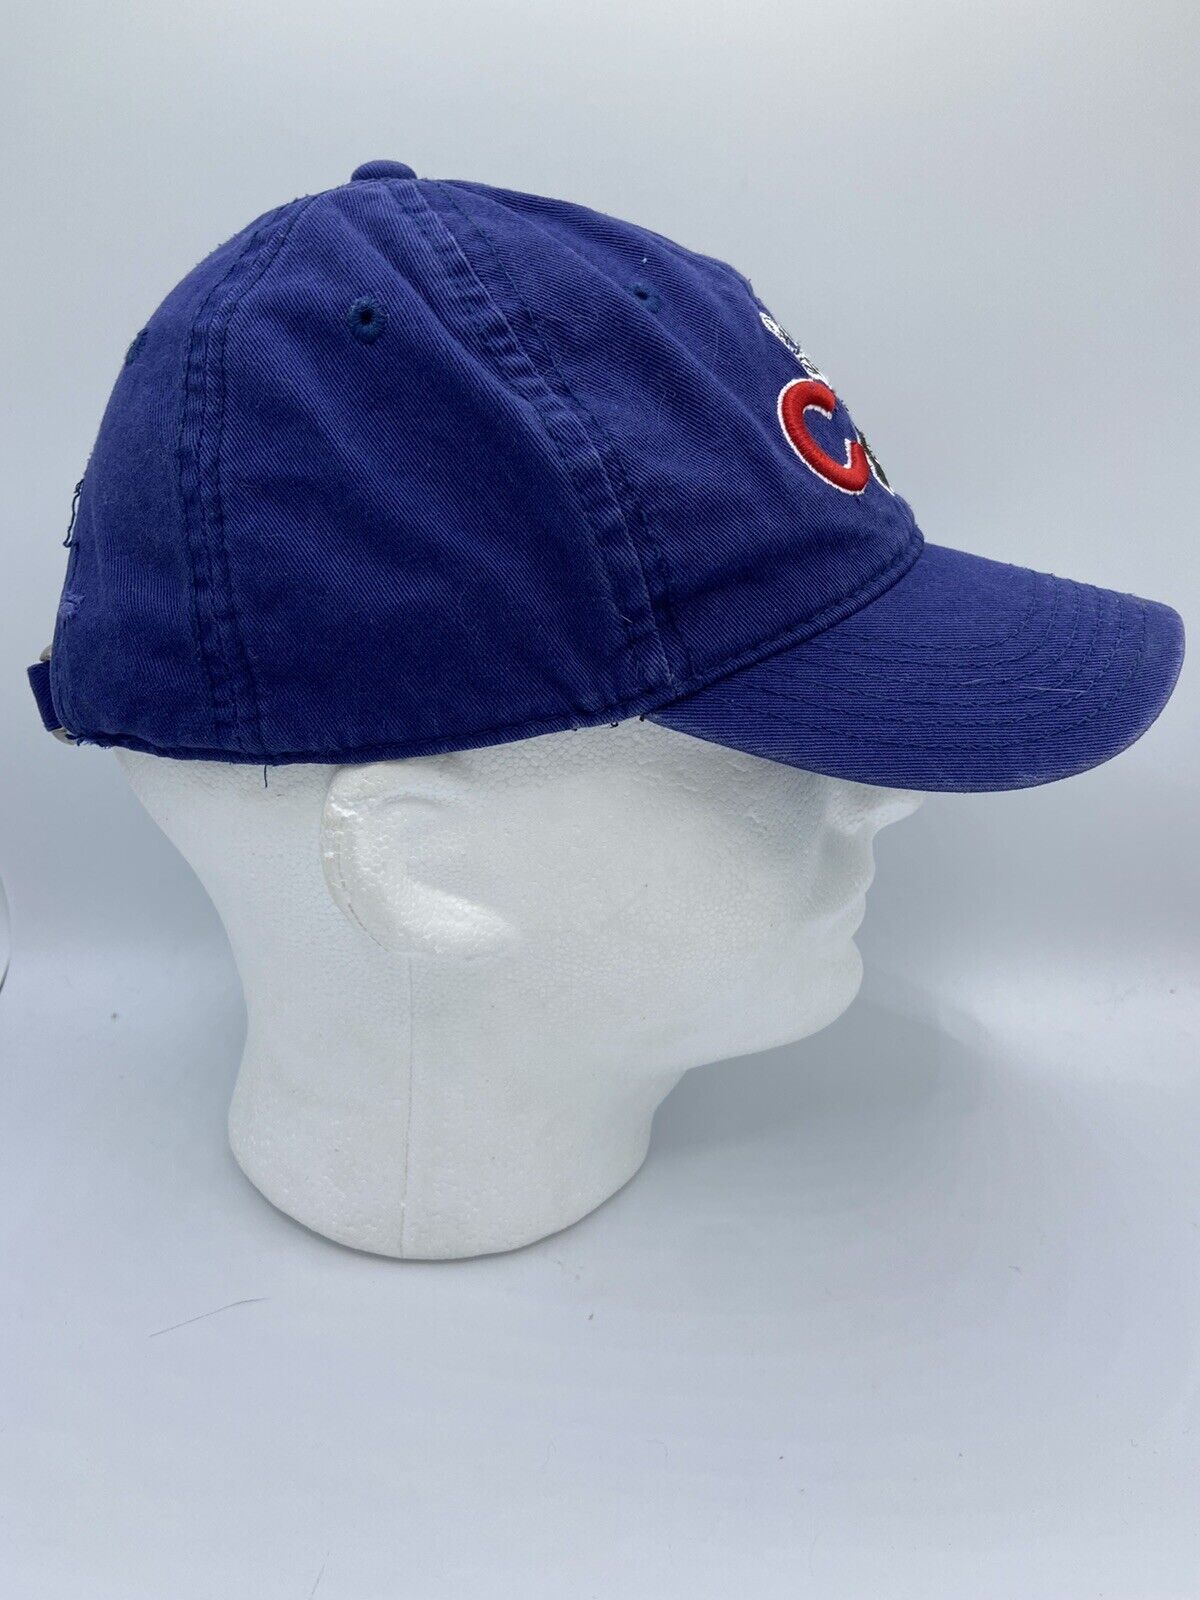 New Era x Disney MLB Chicago Cubs Mickey Mouse Child Blue Adjustable Hat